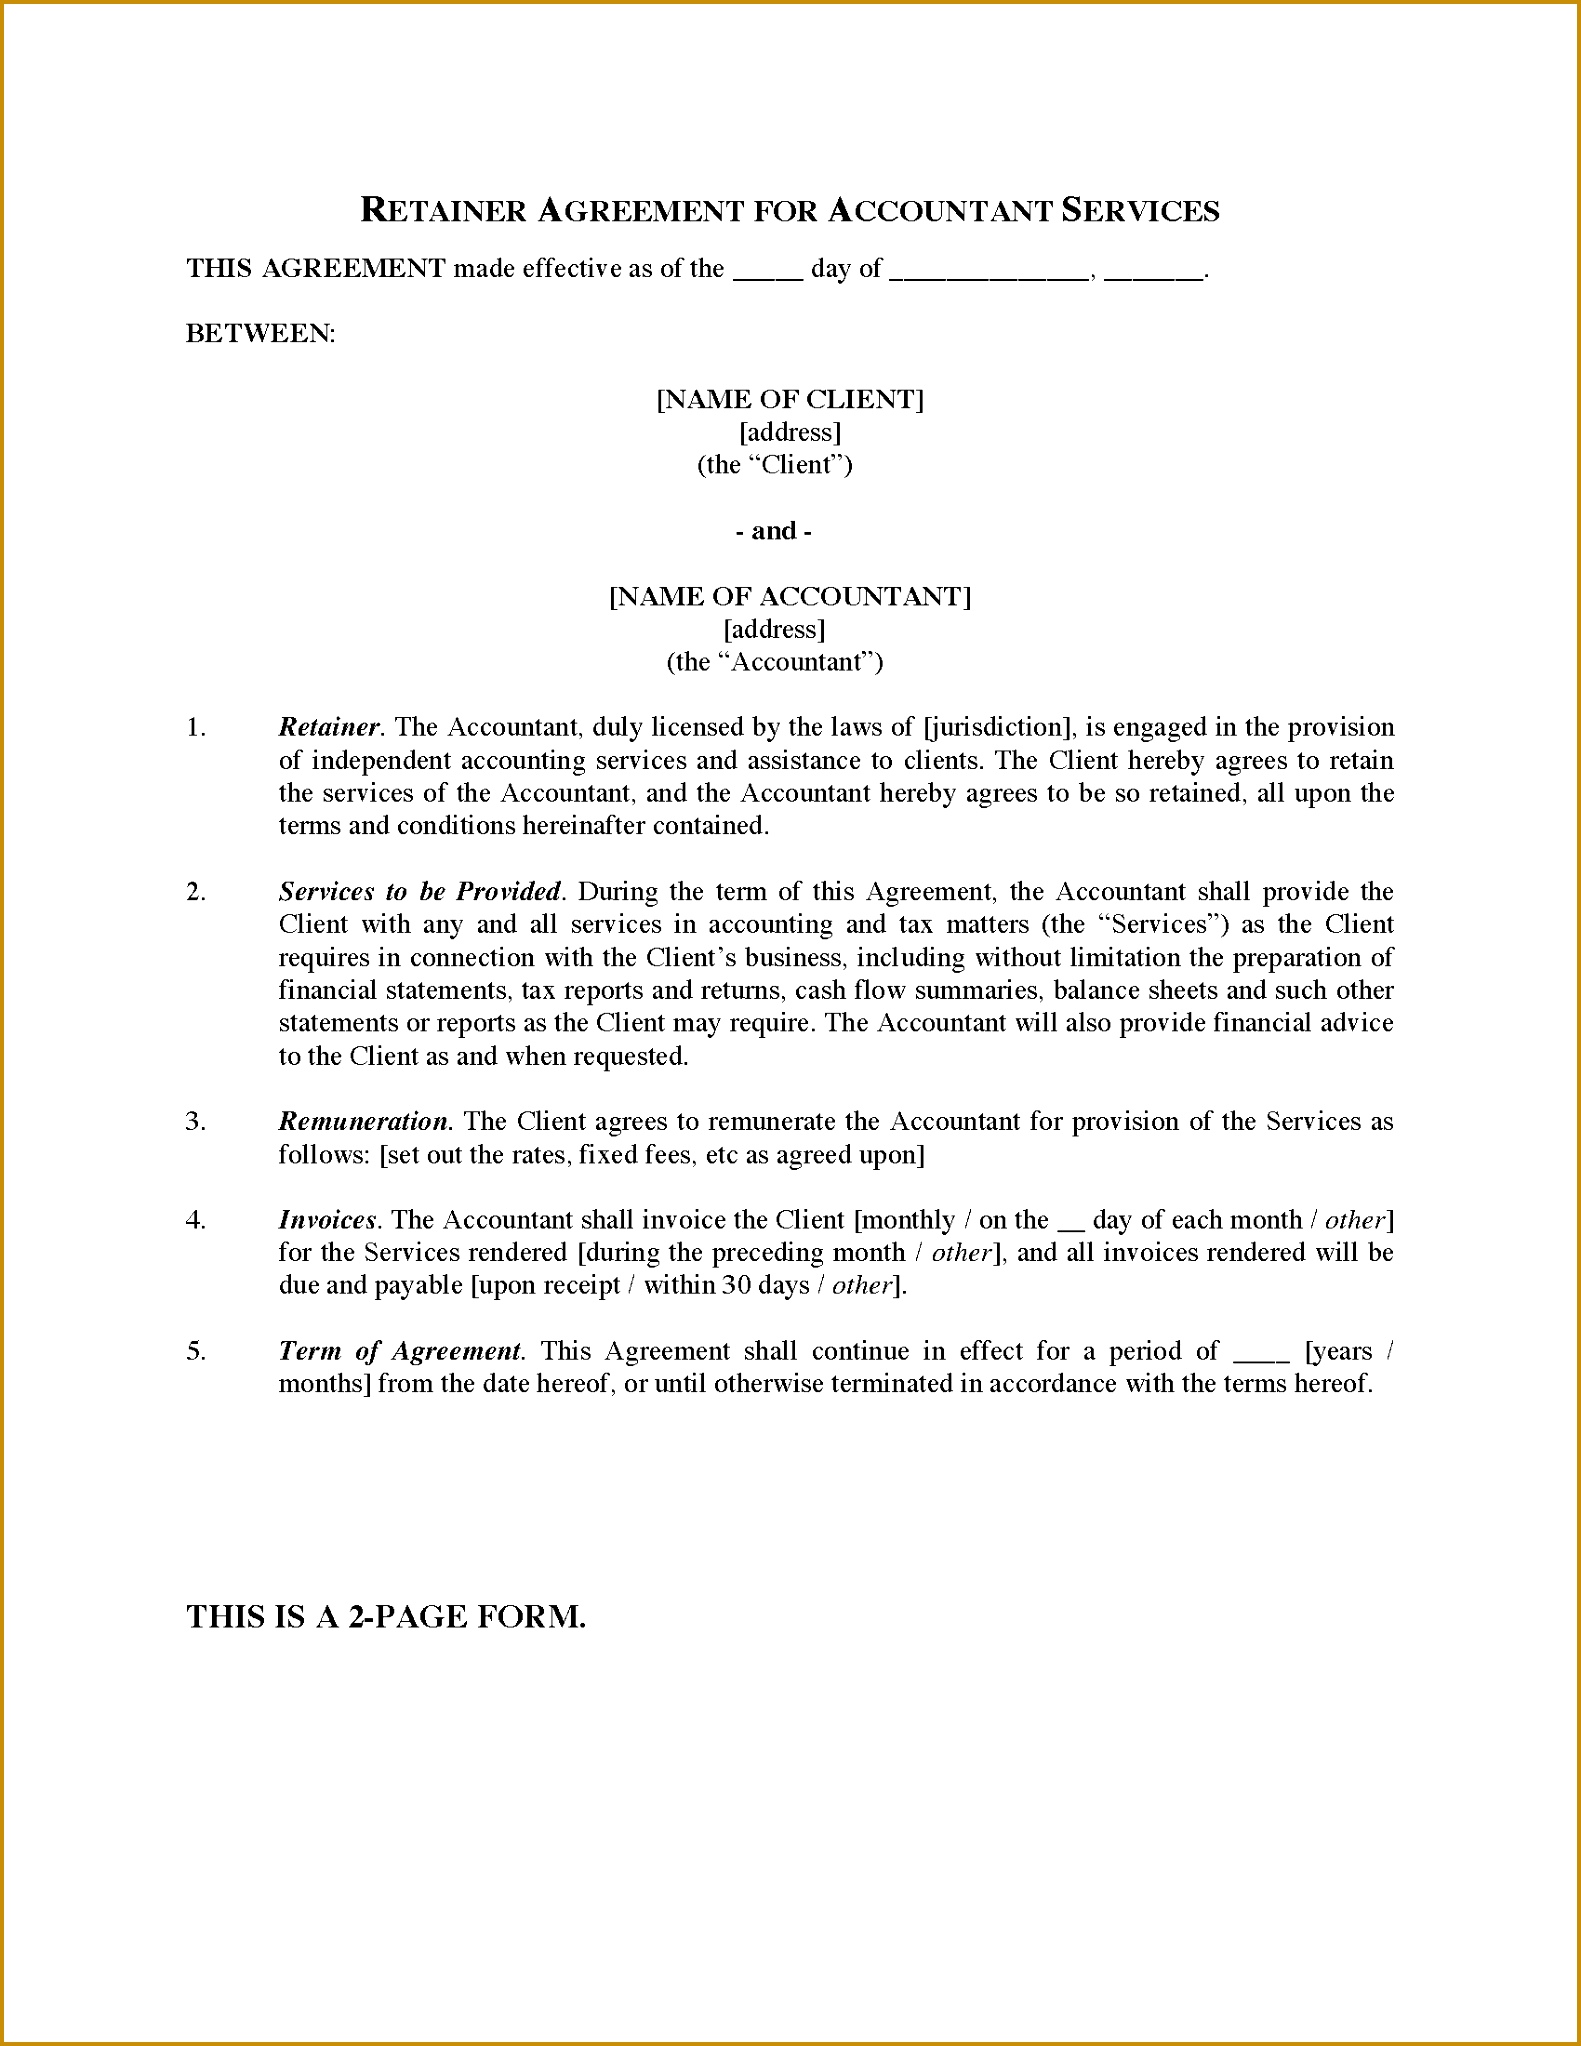 Picture of Retainer Agreement for Accounting Services 15812046